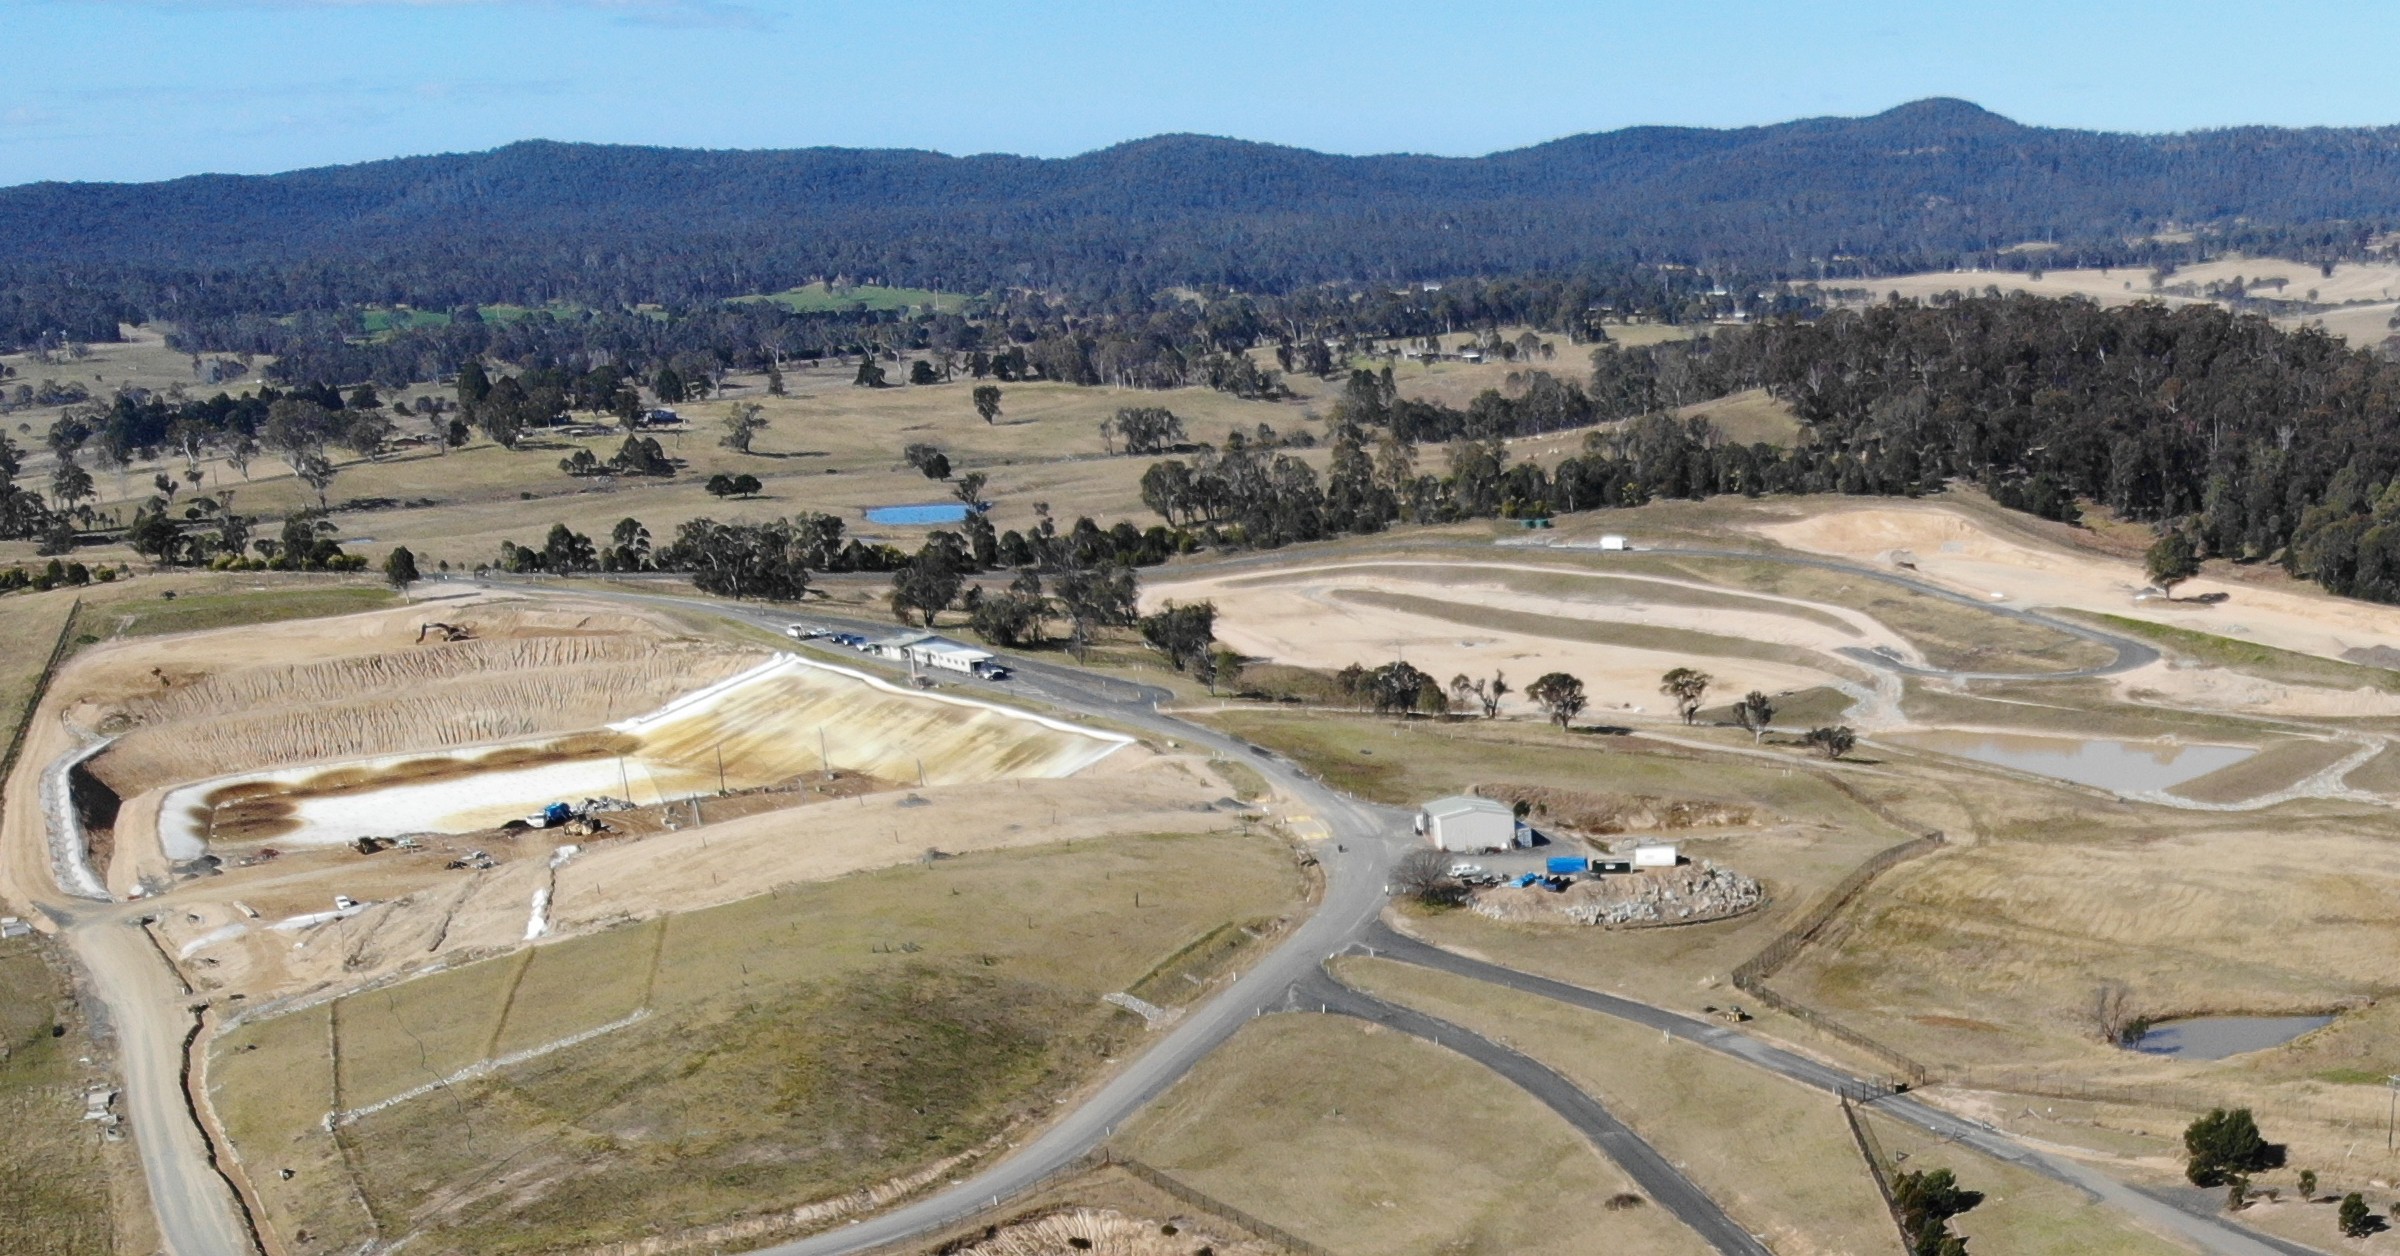 Bega council proposes expanding landfill days at Wolumla tip to deal with waste loads